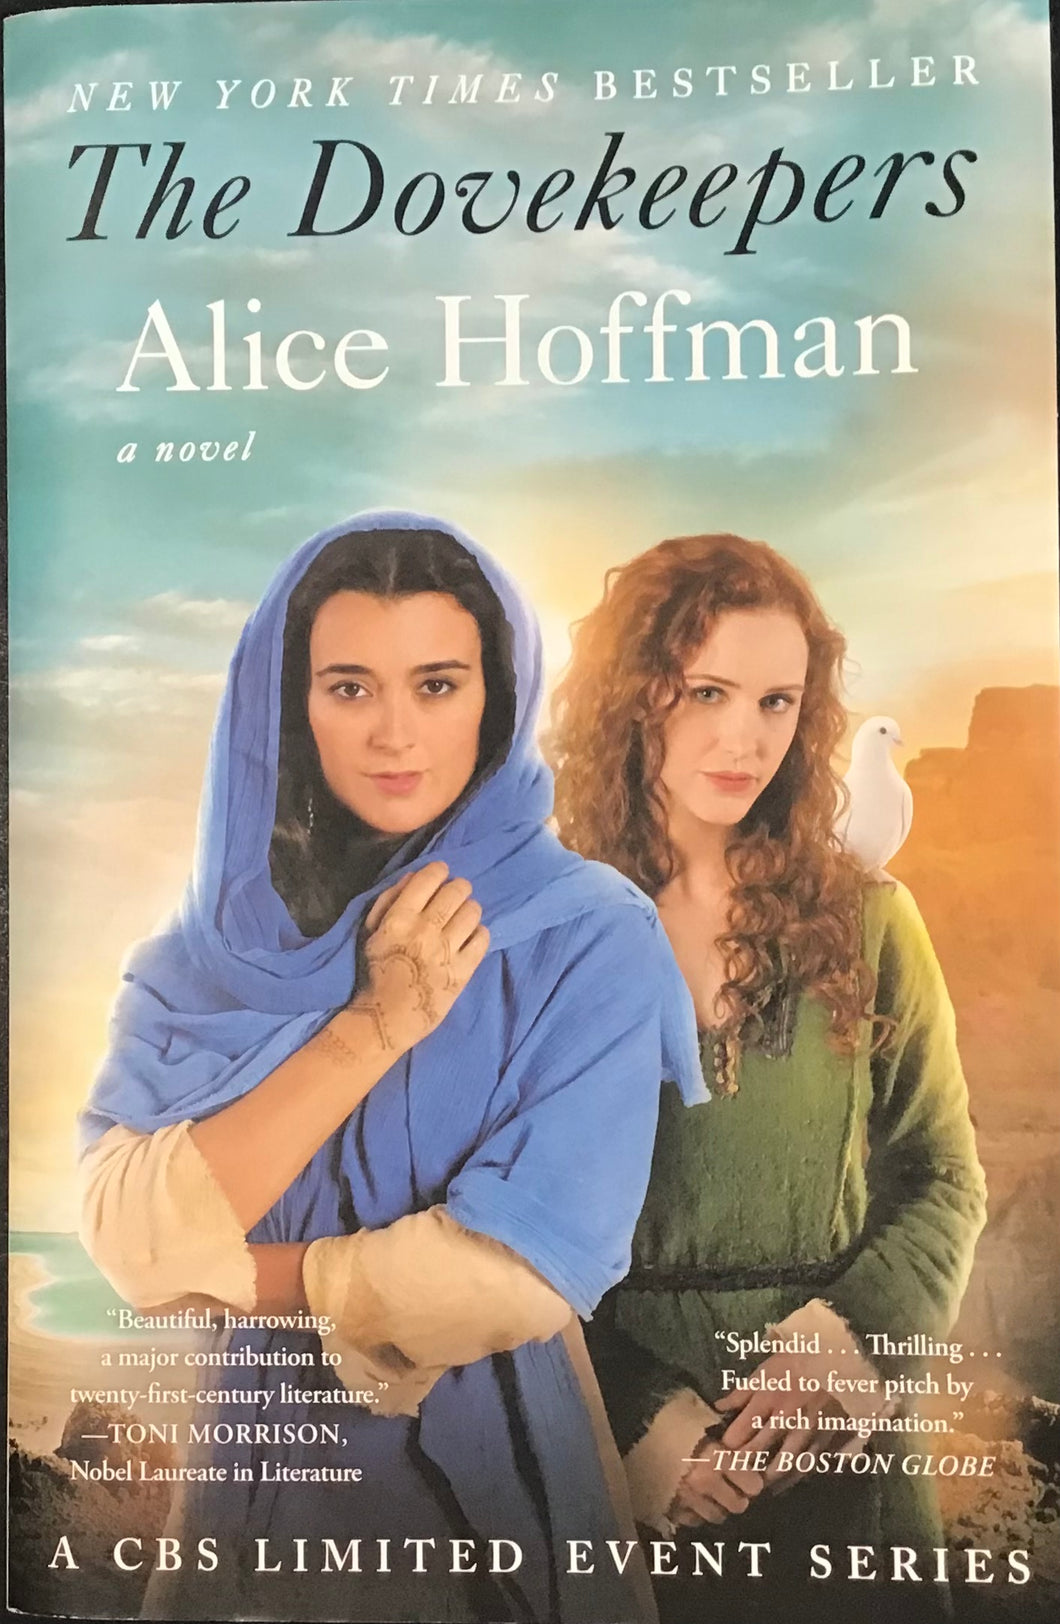 The Dovekeepers, by Alice Hoffman